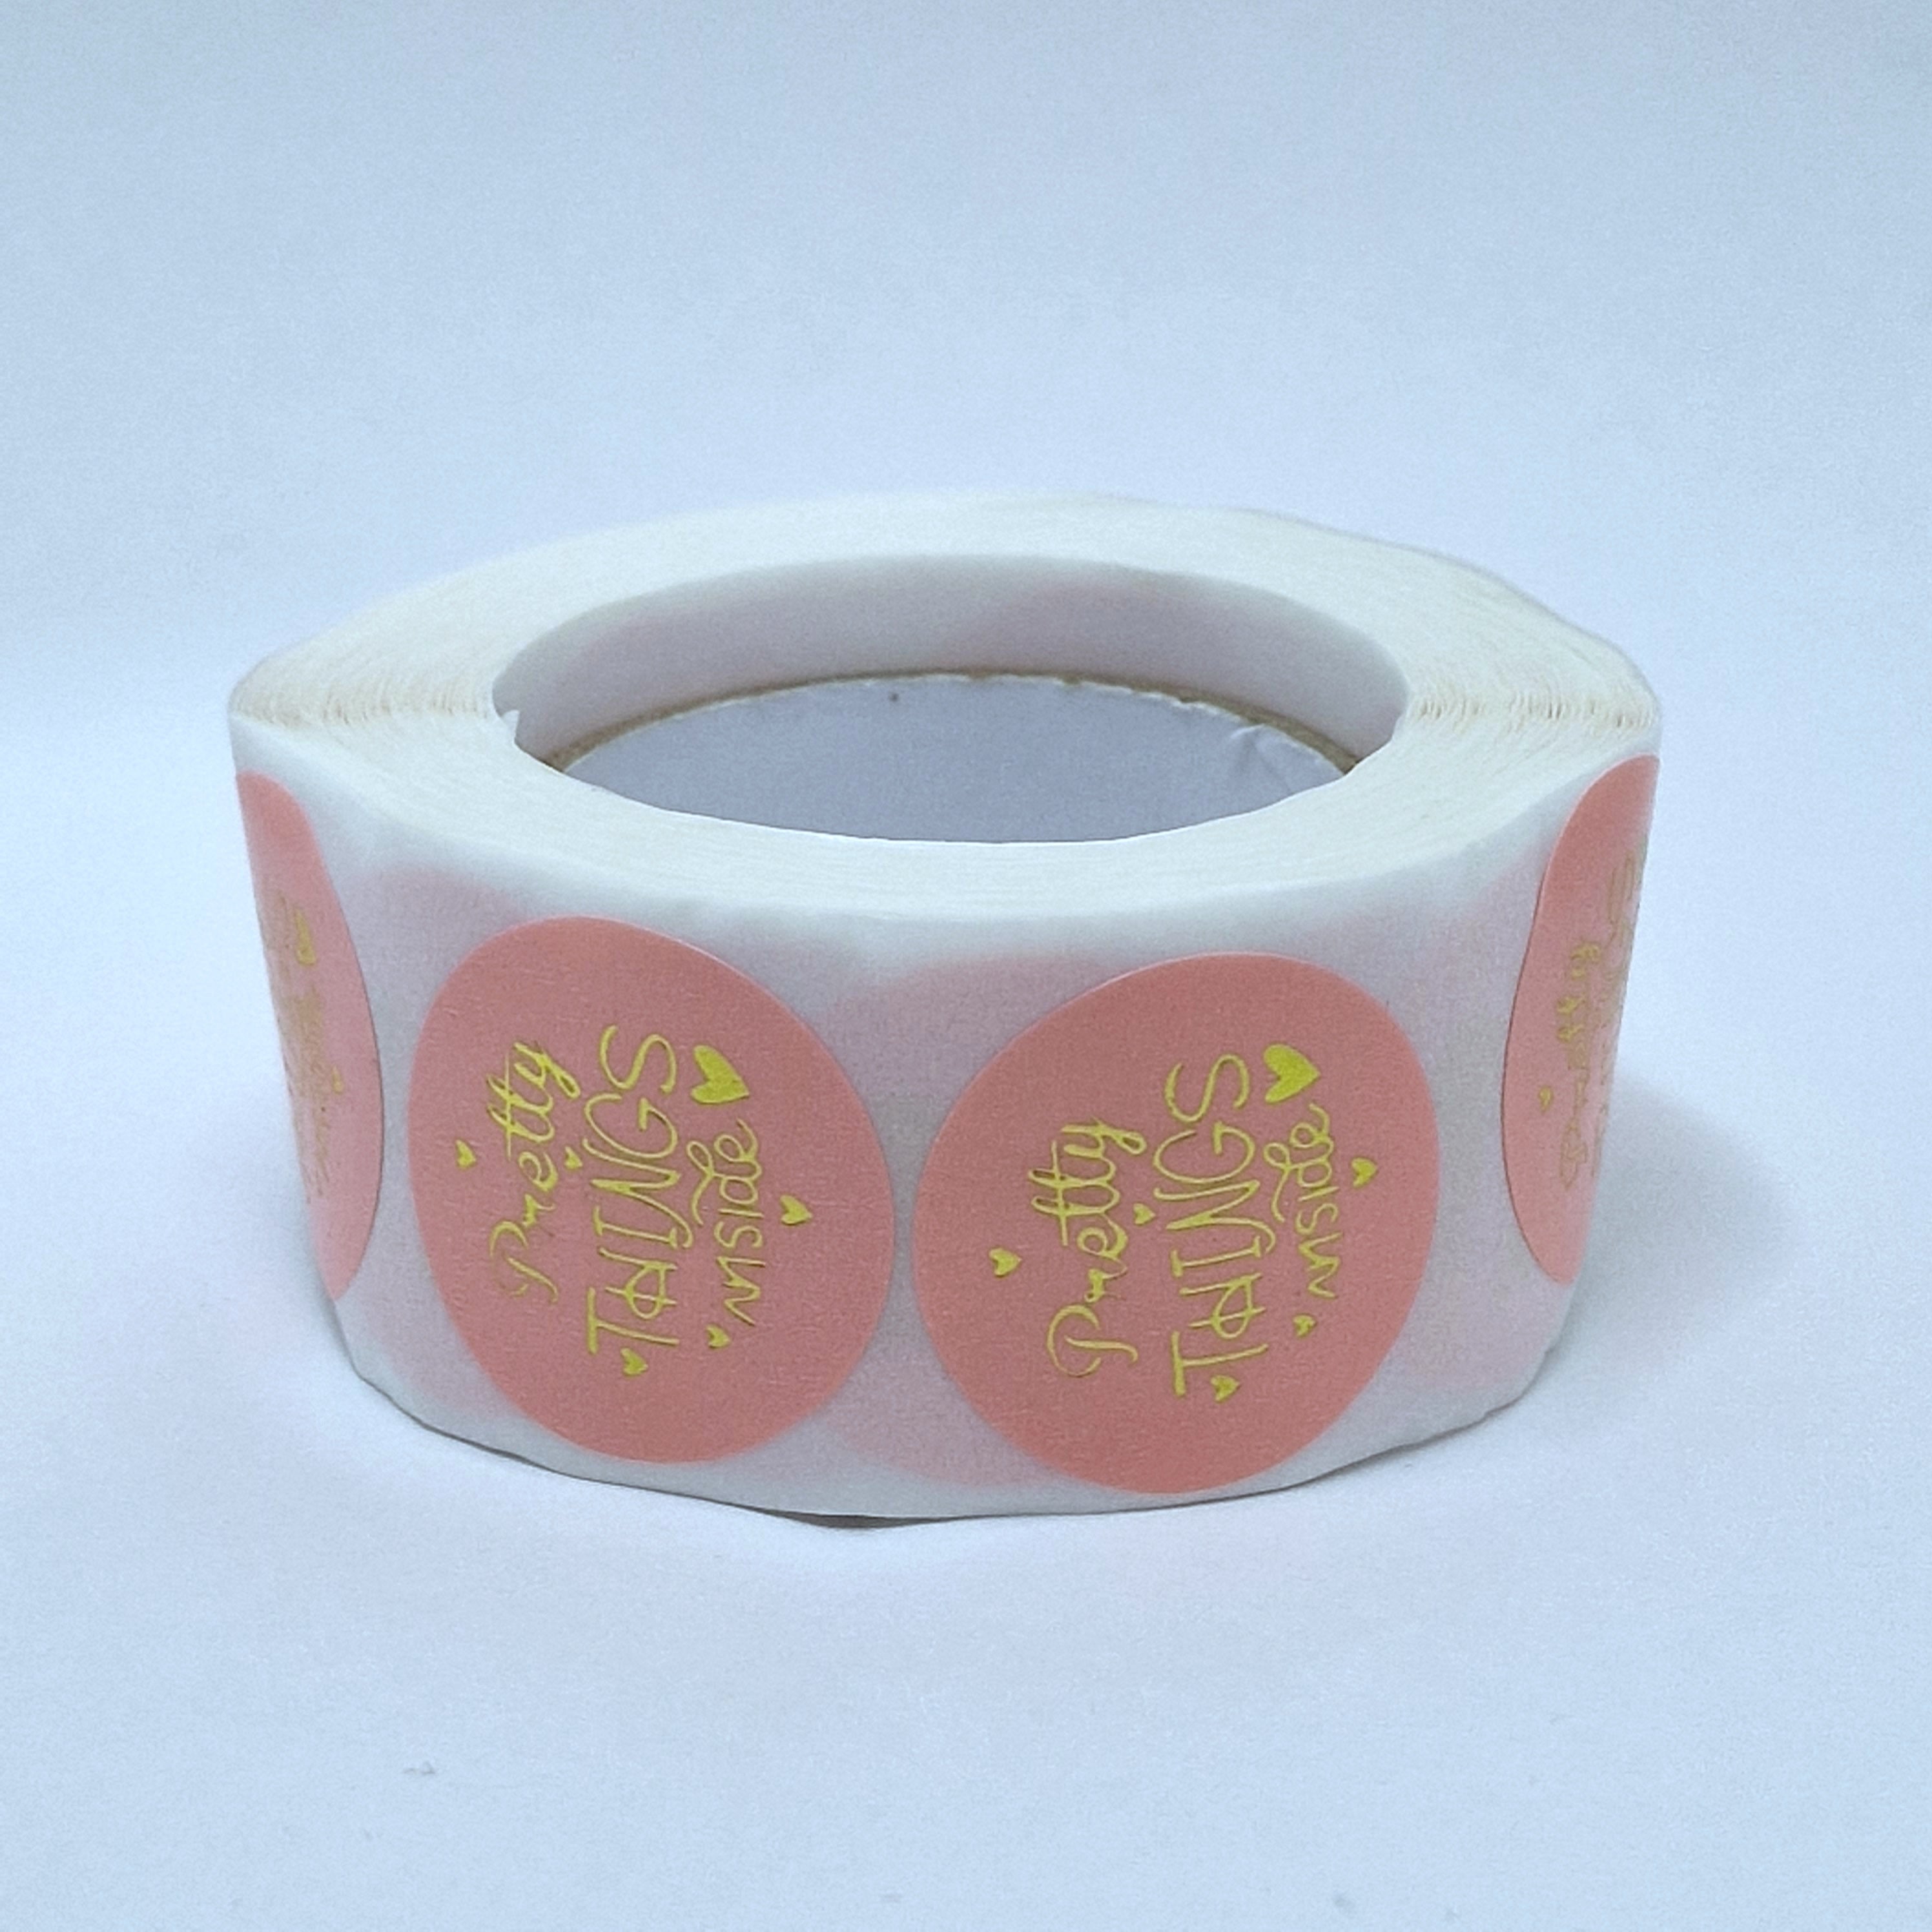 MajorCrafts 500 Labels per roll 2.5cm 1" wide Pink & Gold 'Pretty Things Inside' Printed Round Stickers V003